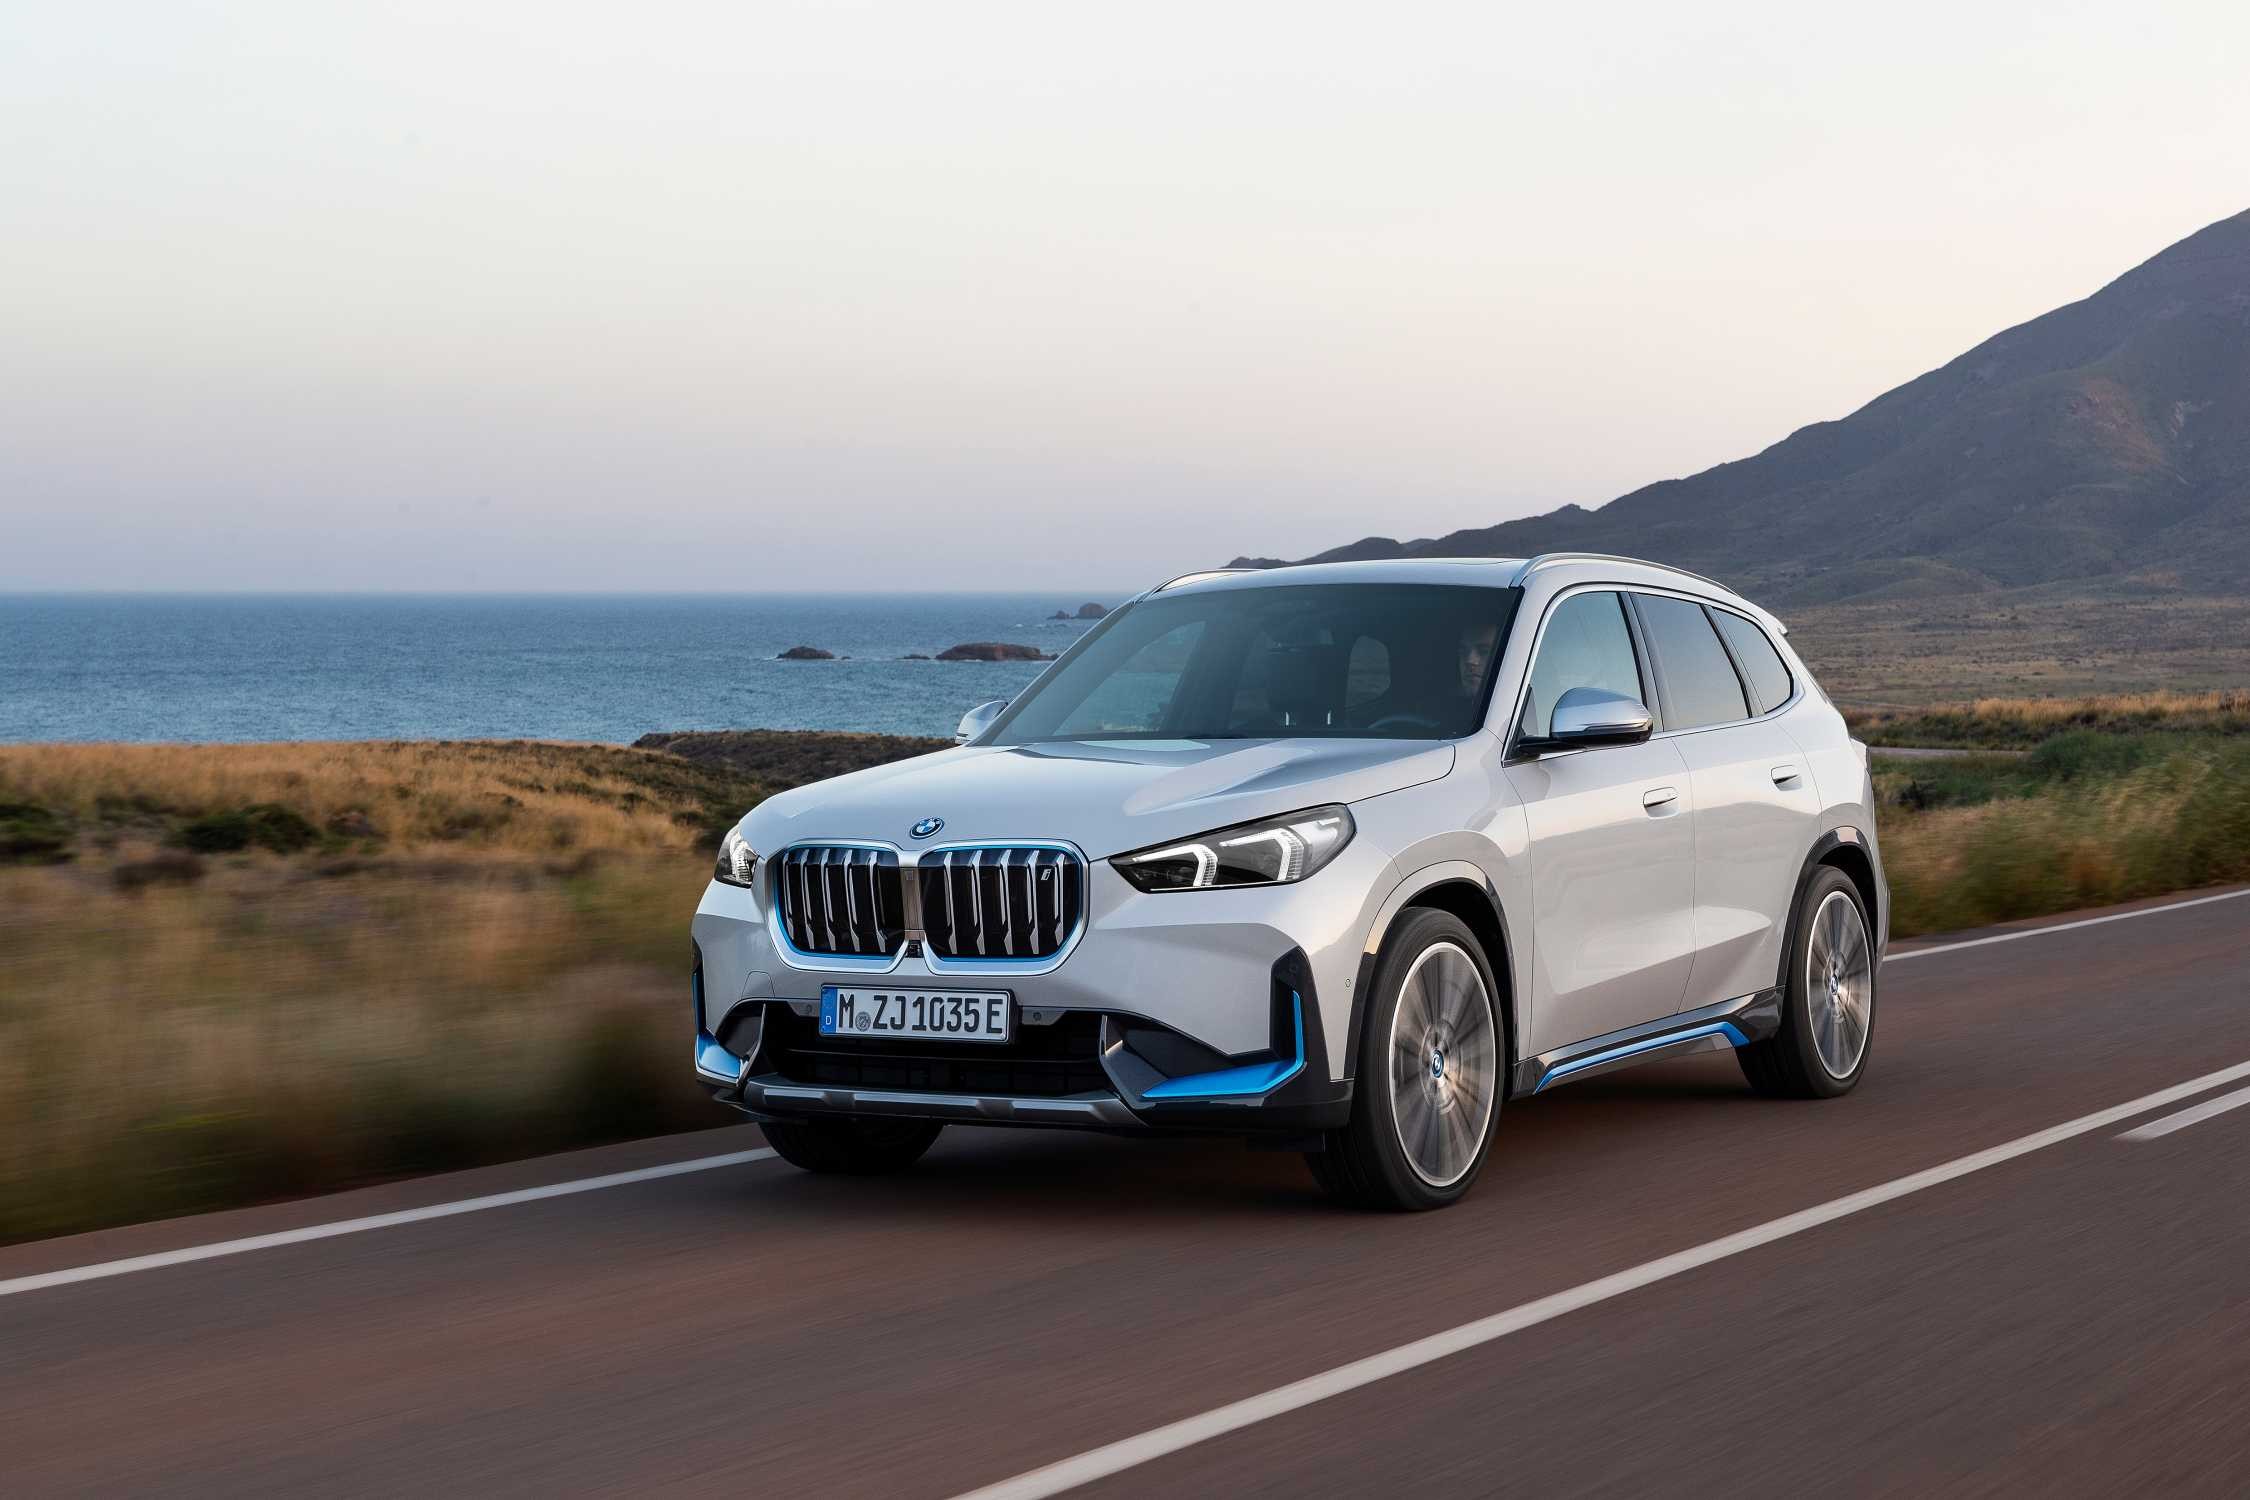 Review chi tiết BMW X1 2023